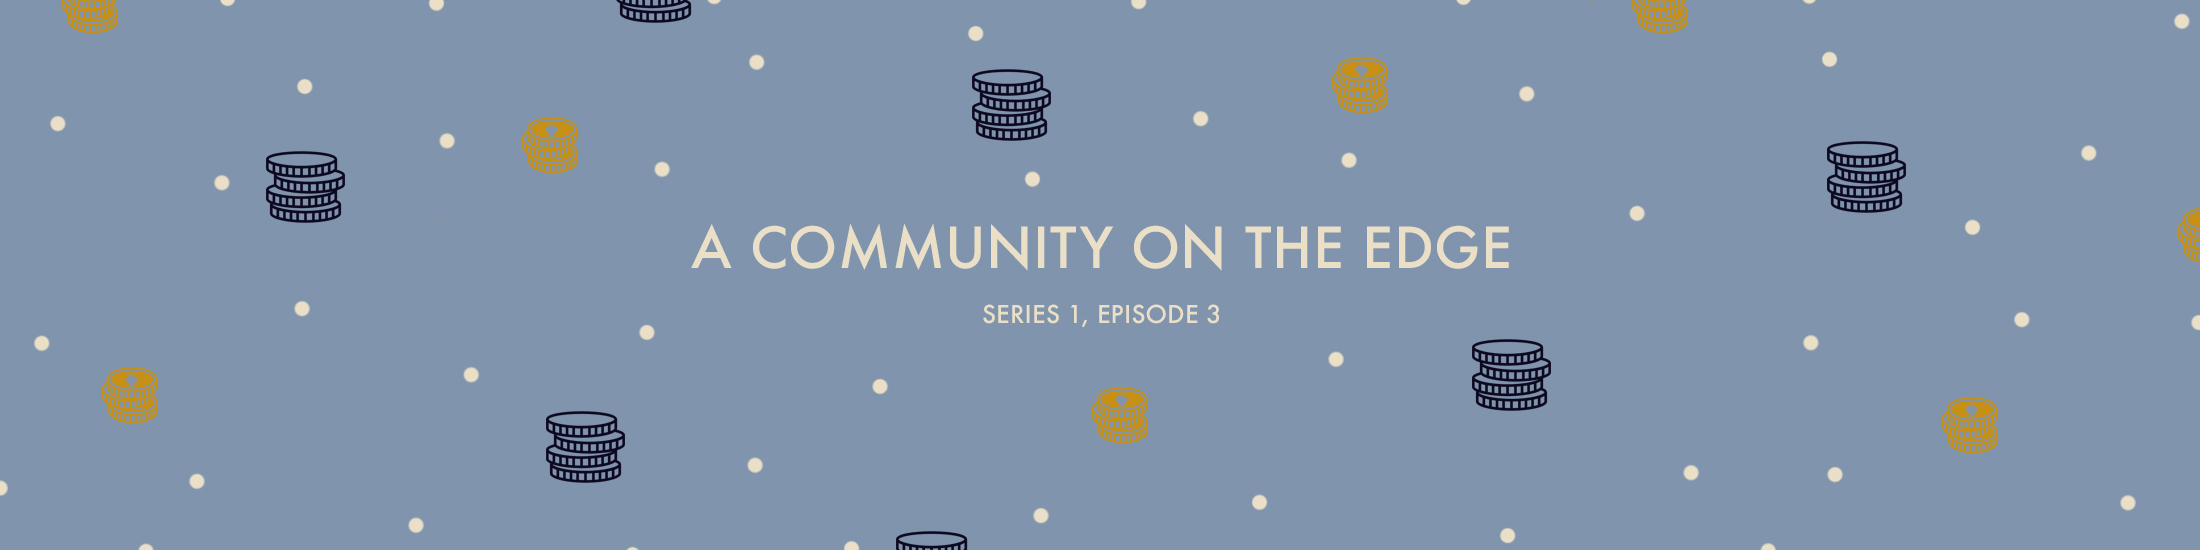 A community on the edge text with coin graphics